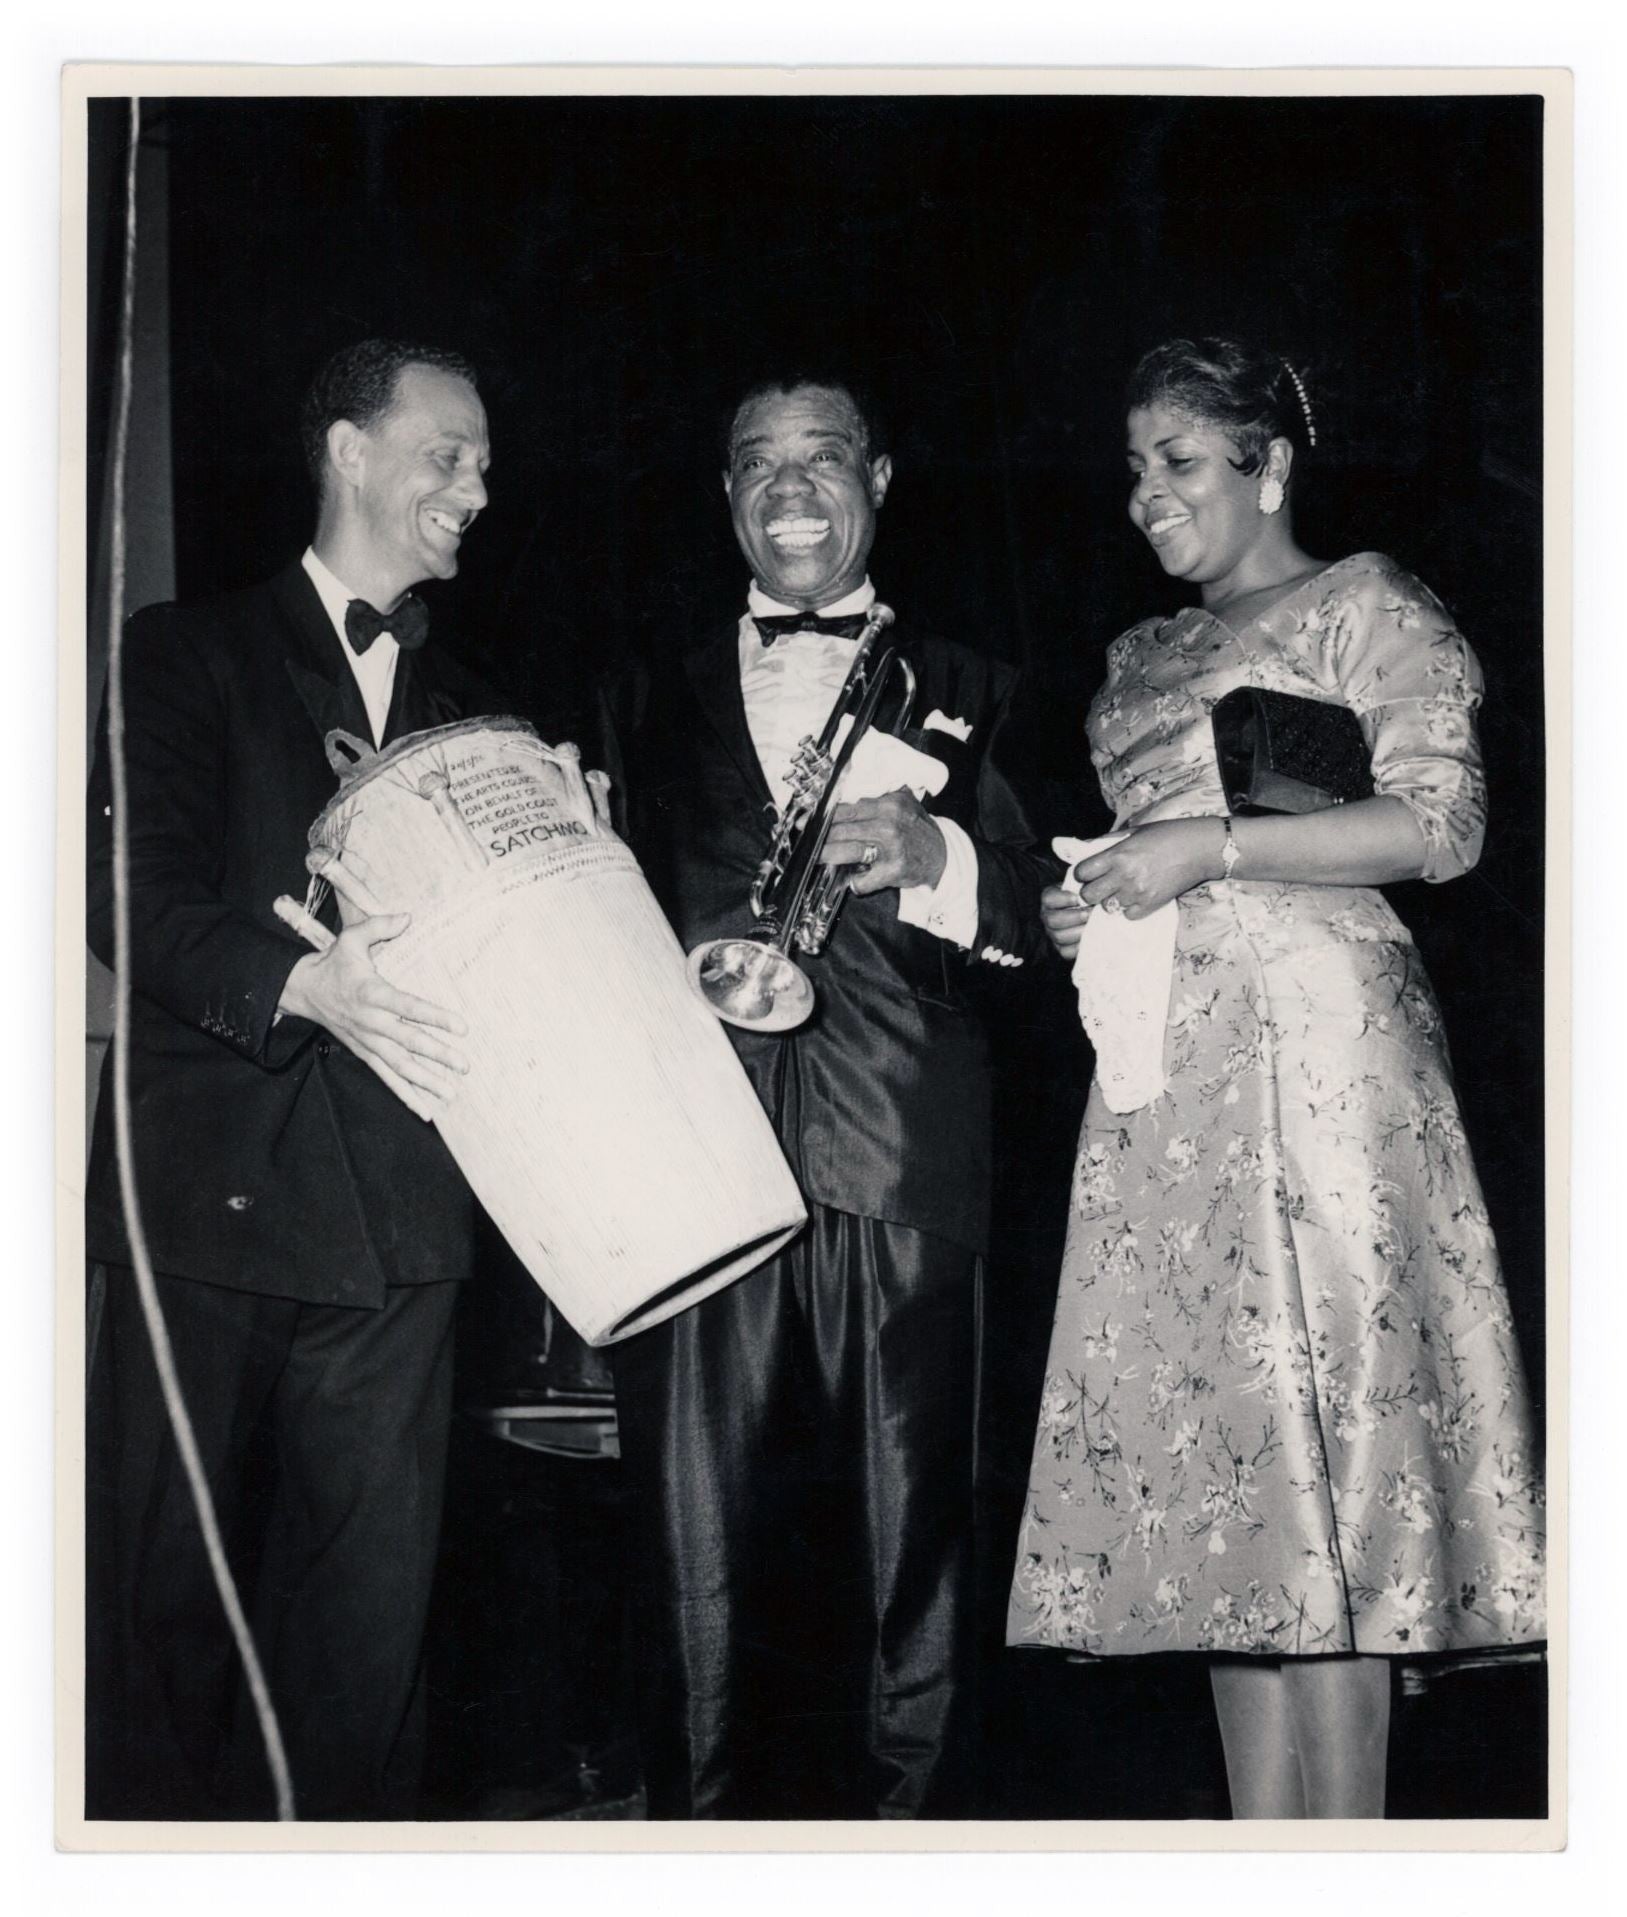 LOUIS ARMSTRONG - ICONIC JAZZ TRUMPETER & VOCALIST - VINTAGE PRESS PHOTOGRAPH